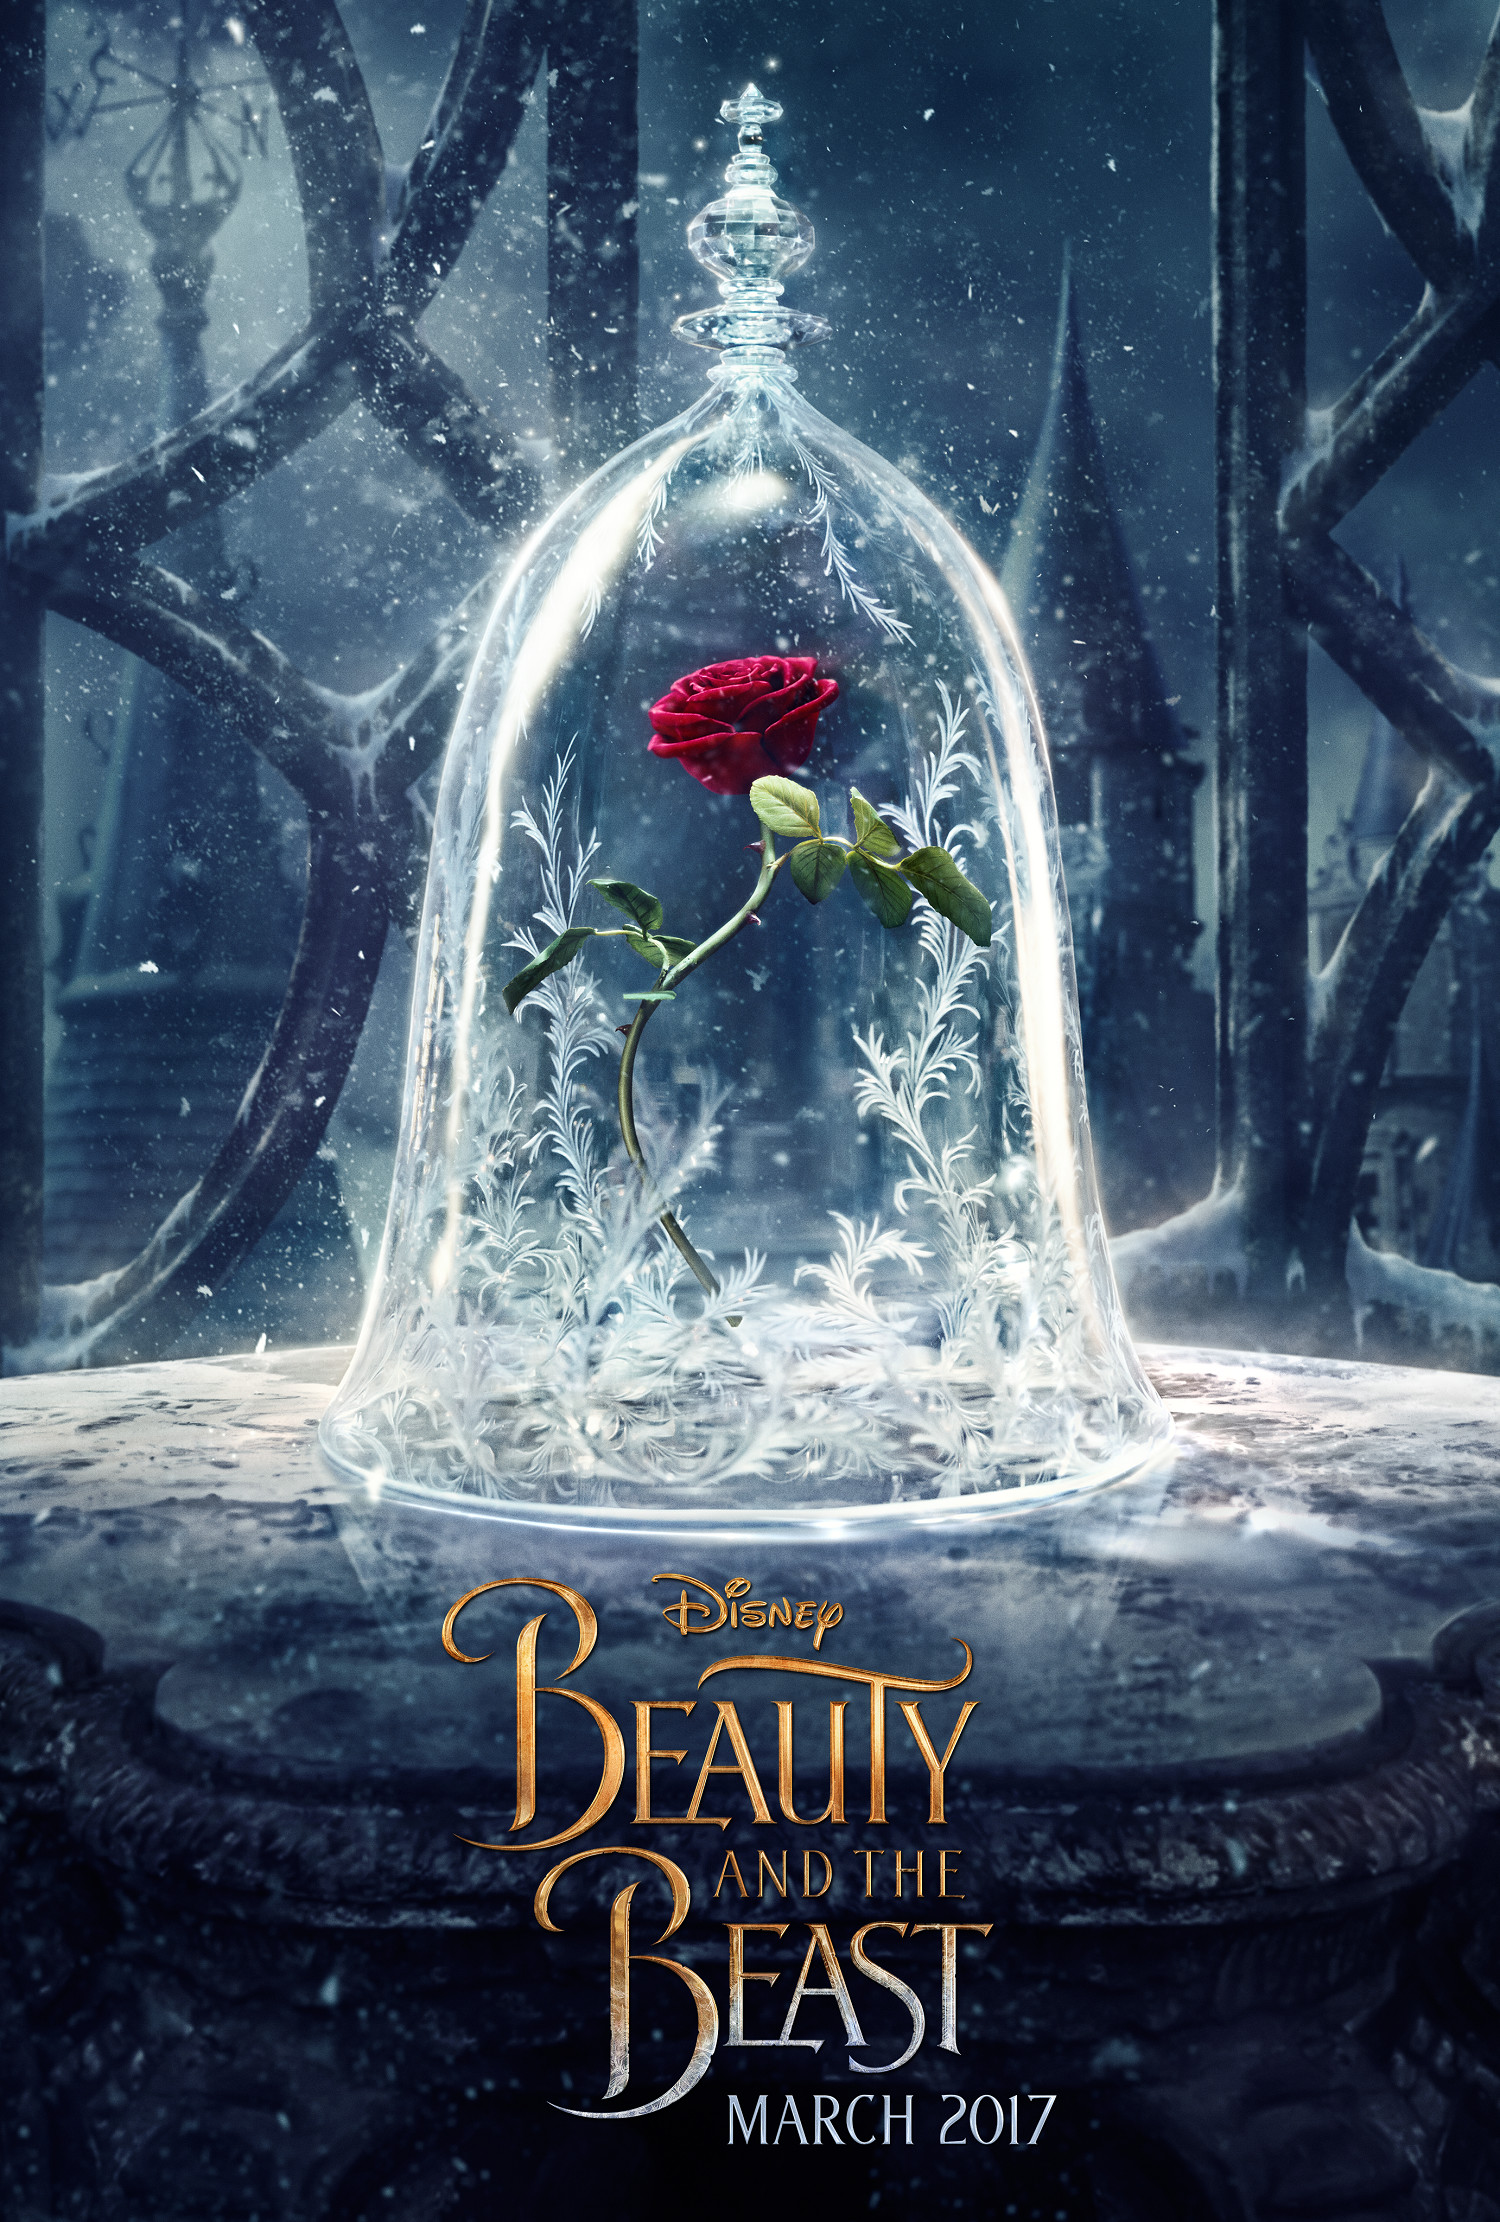 1500x2222 The first official Beauty and the Beast movie poster!